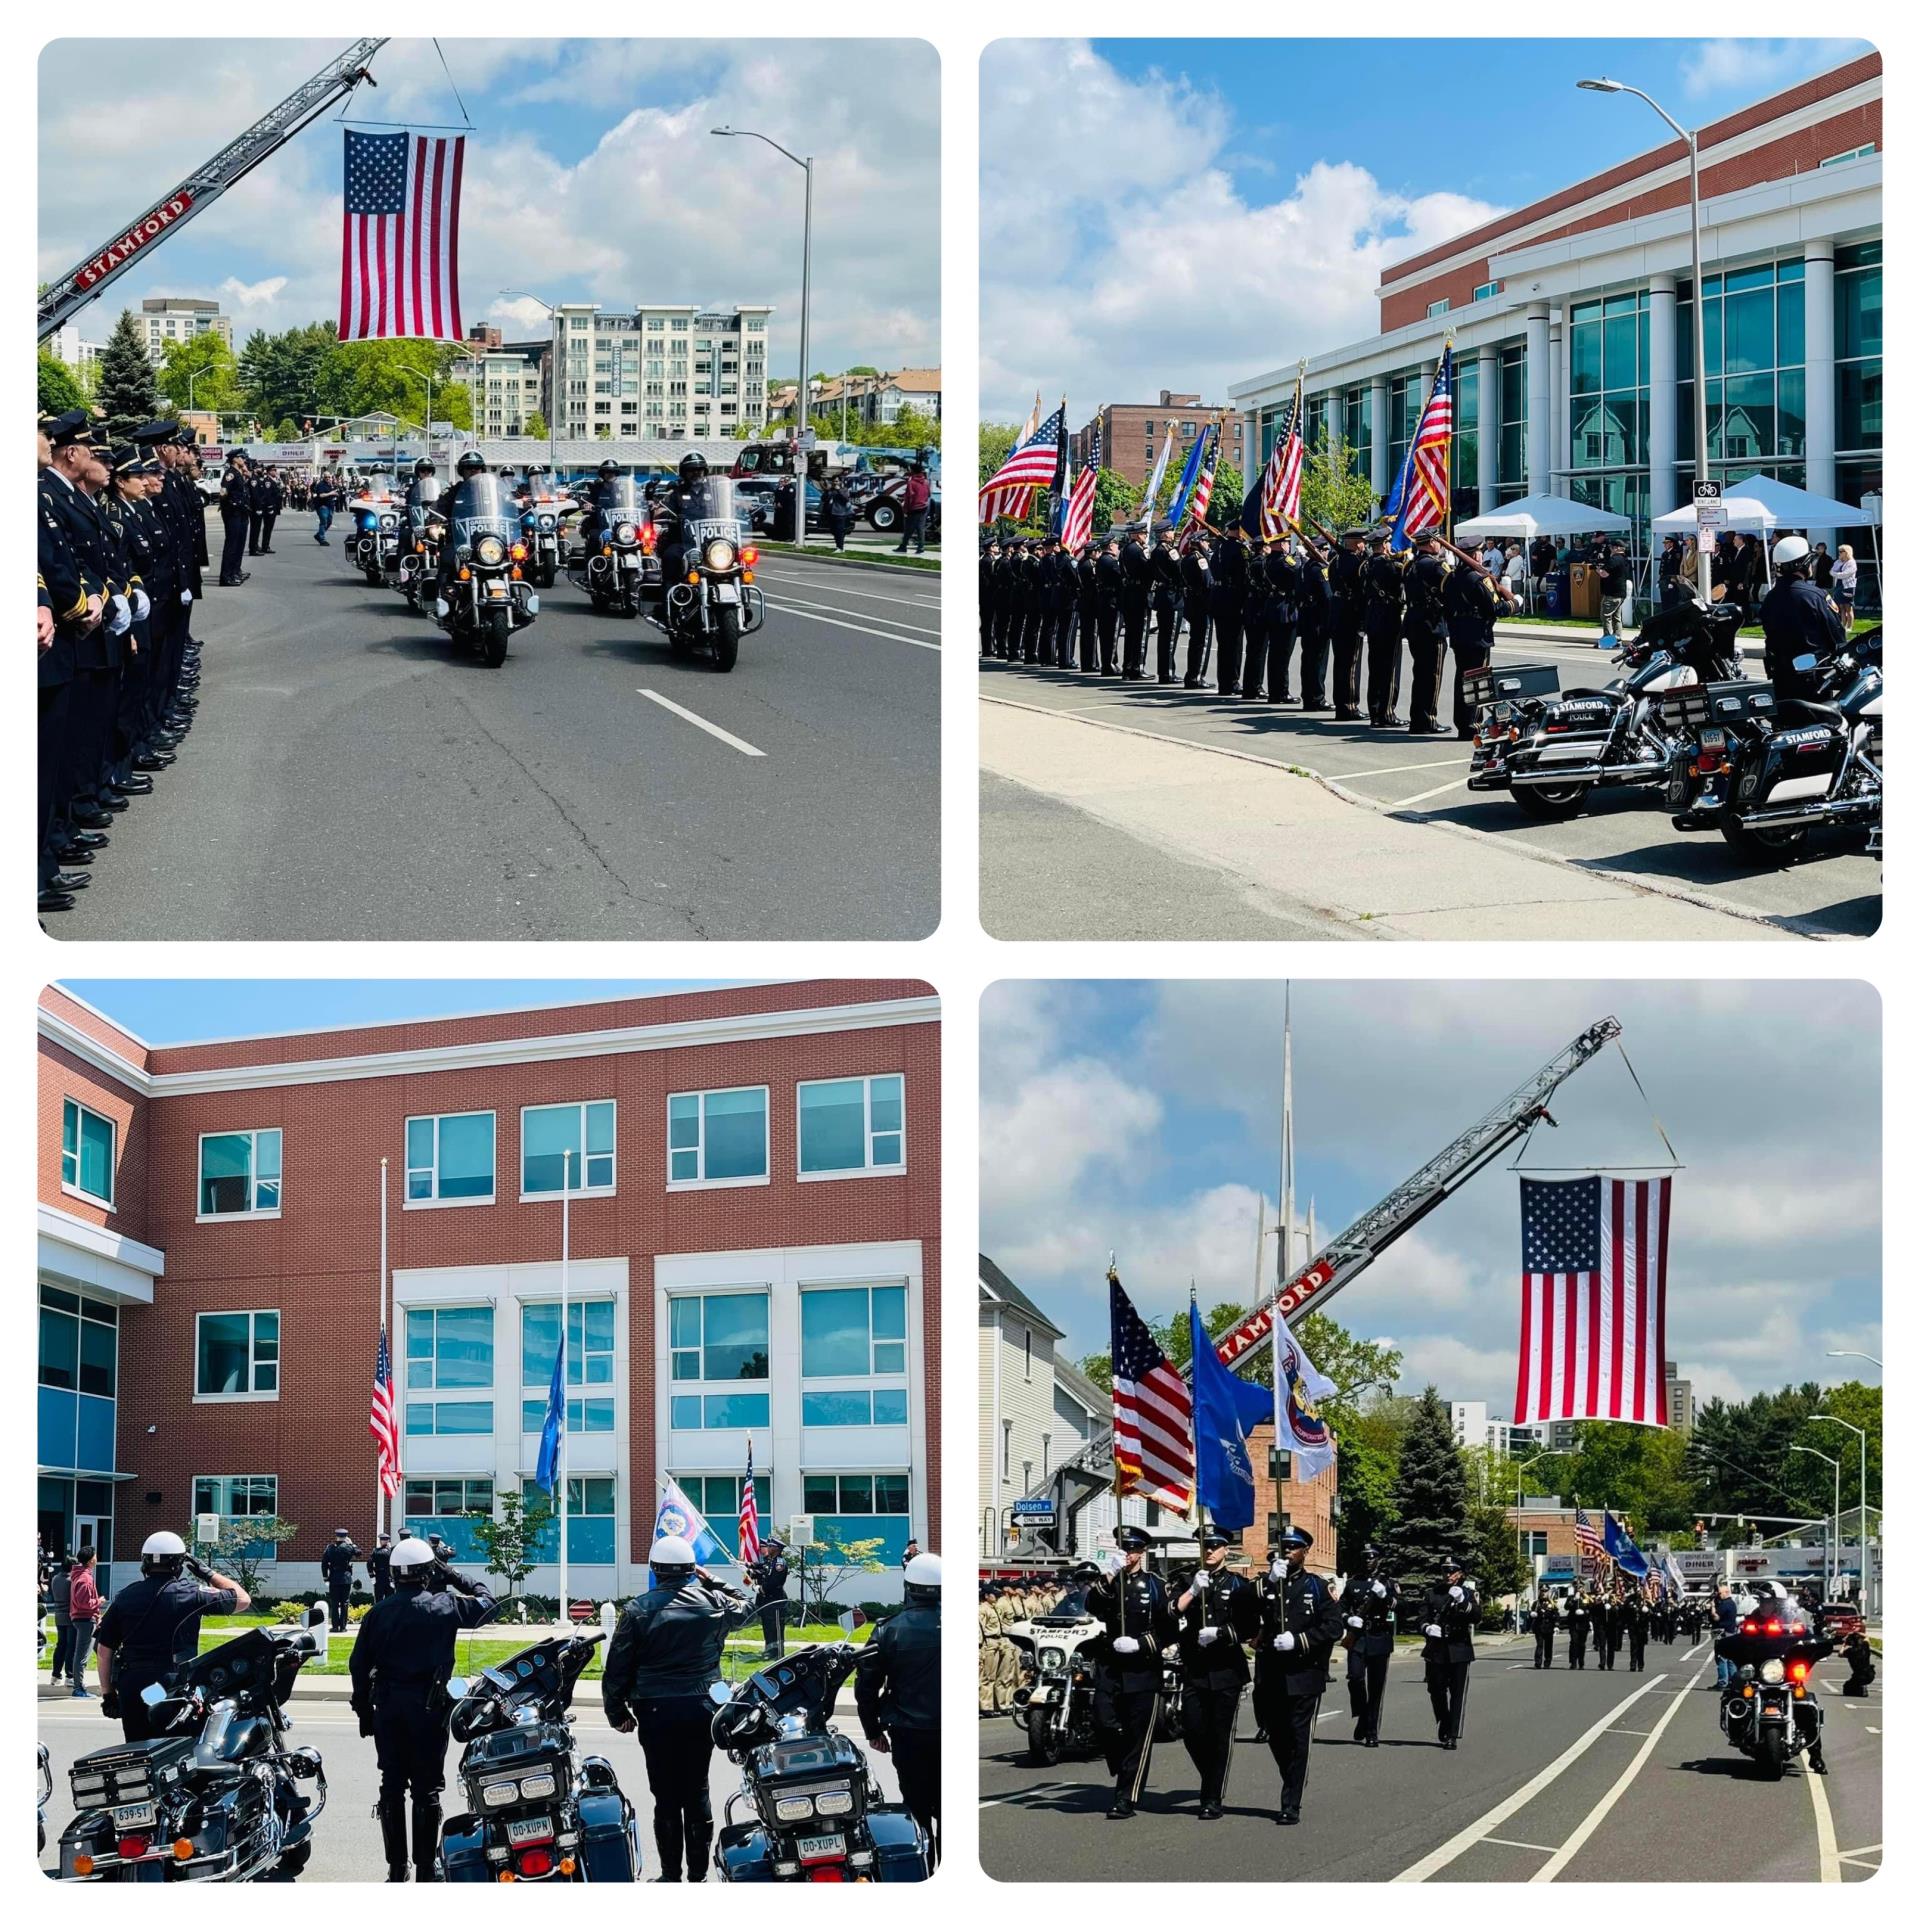 A collage of photos from Police Memorial Day A collage of photos from Police Memorial Day including Mayor Simmons speaking, Police officers saluting the flag, an american flag hanging from a firetruck